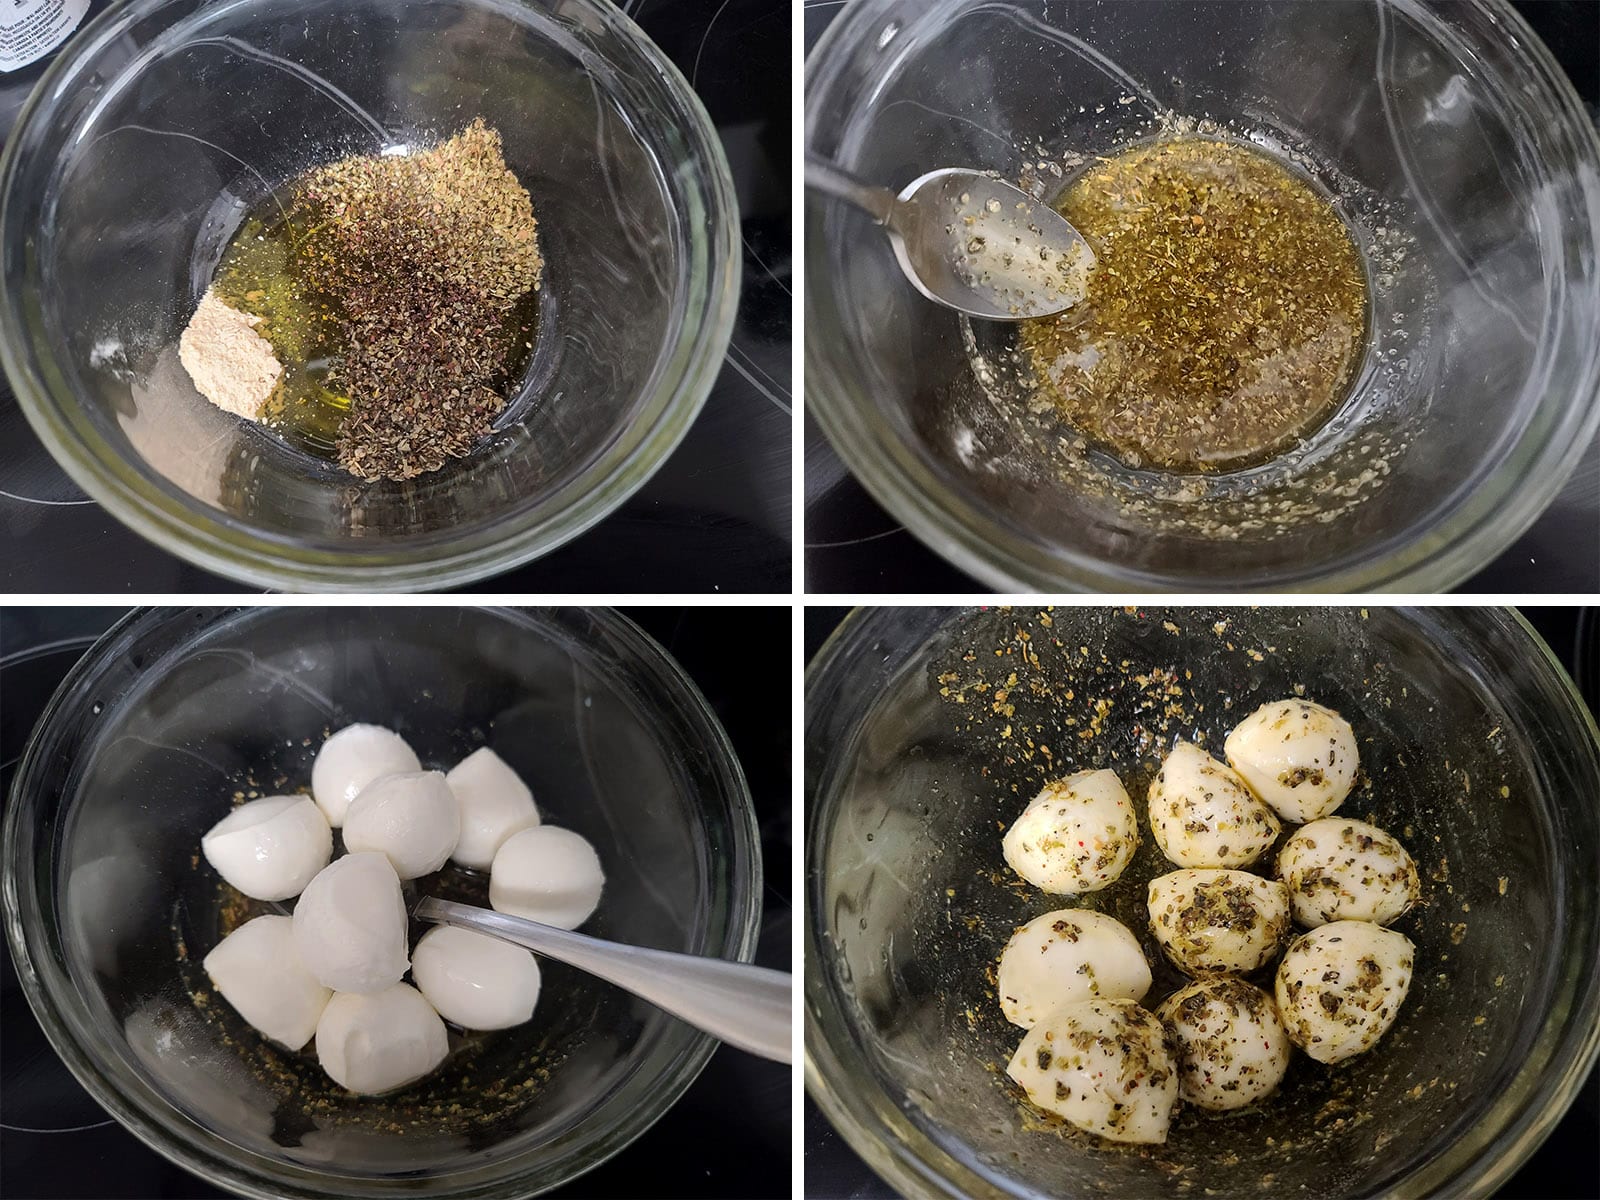 A 4 part image showing the marinade being mixed, bocconcini added, and the cheese coated in marinade.